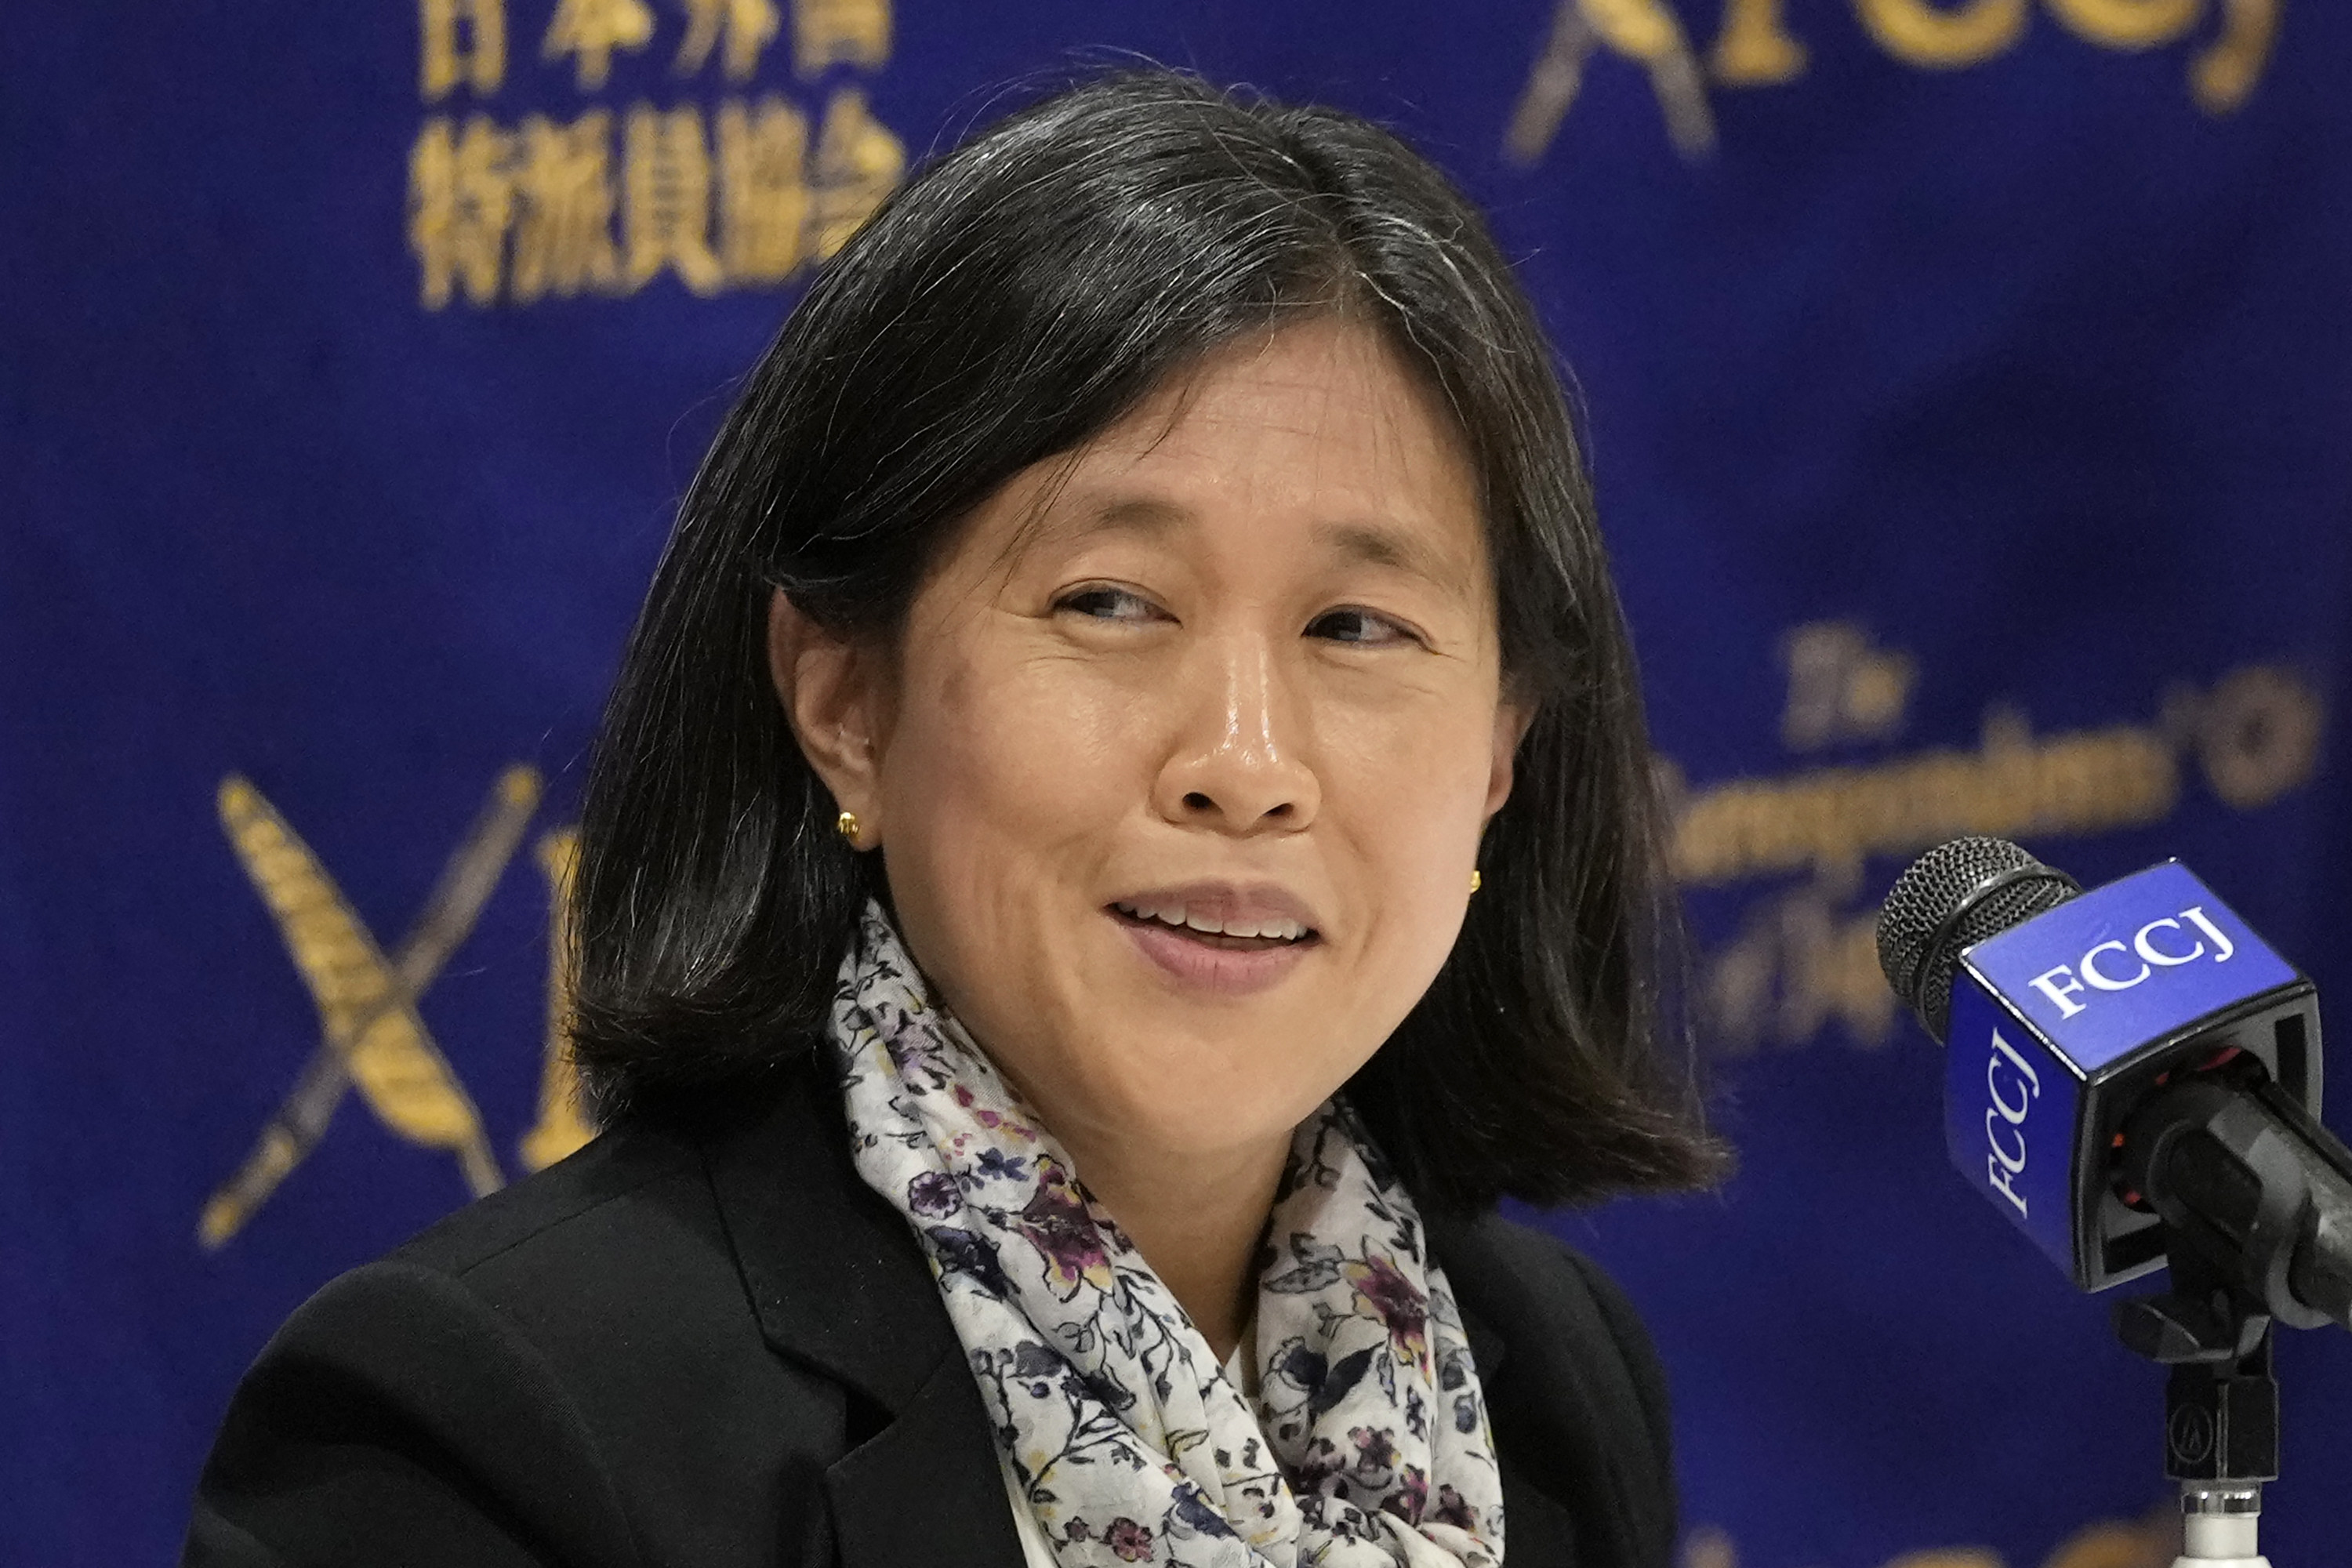 US Trade Representative Katherine Tai plays a leading role in the Biden administration’s China policy. Photo: AP